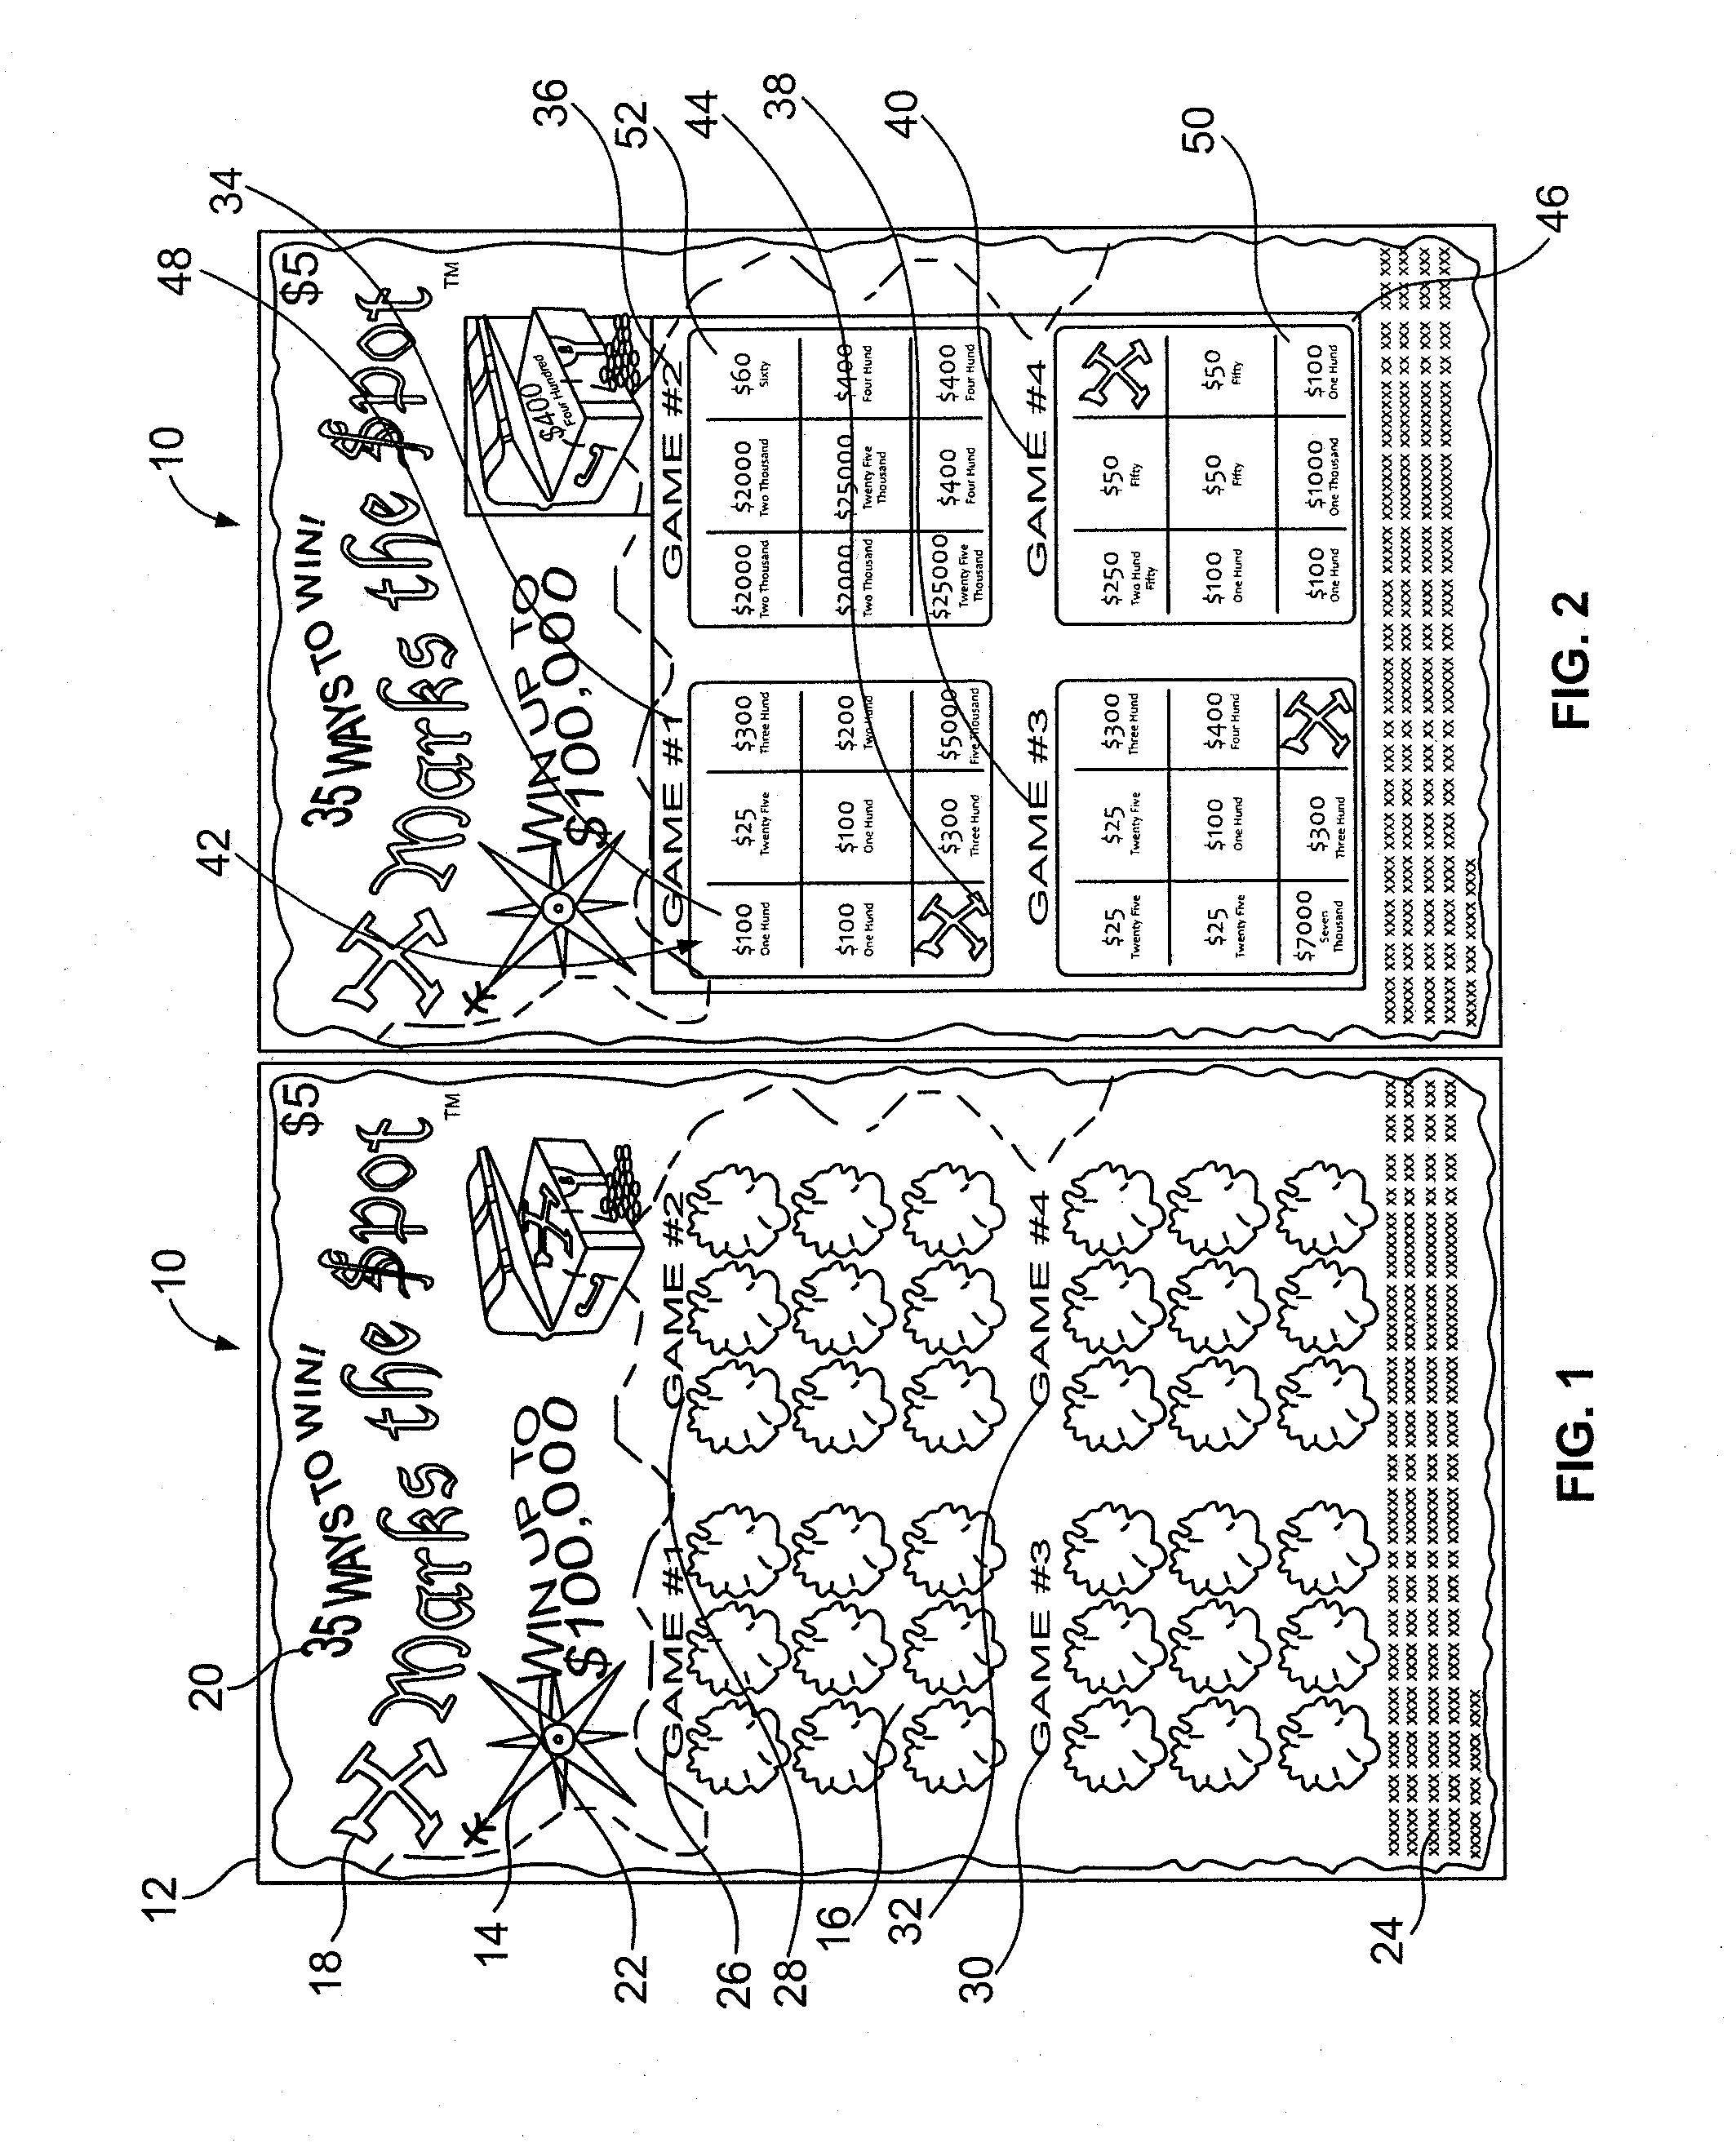 Lottery Ticket Apparatus Containing Multiple Game Play Areas and Methods Thereof